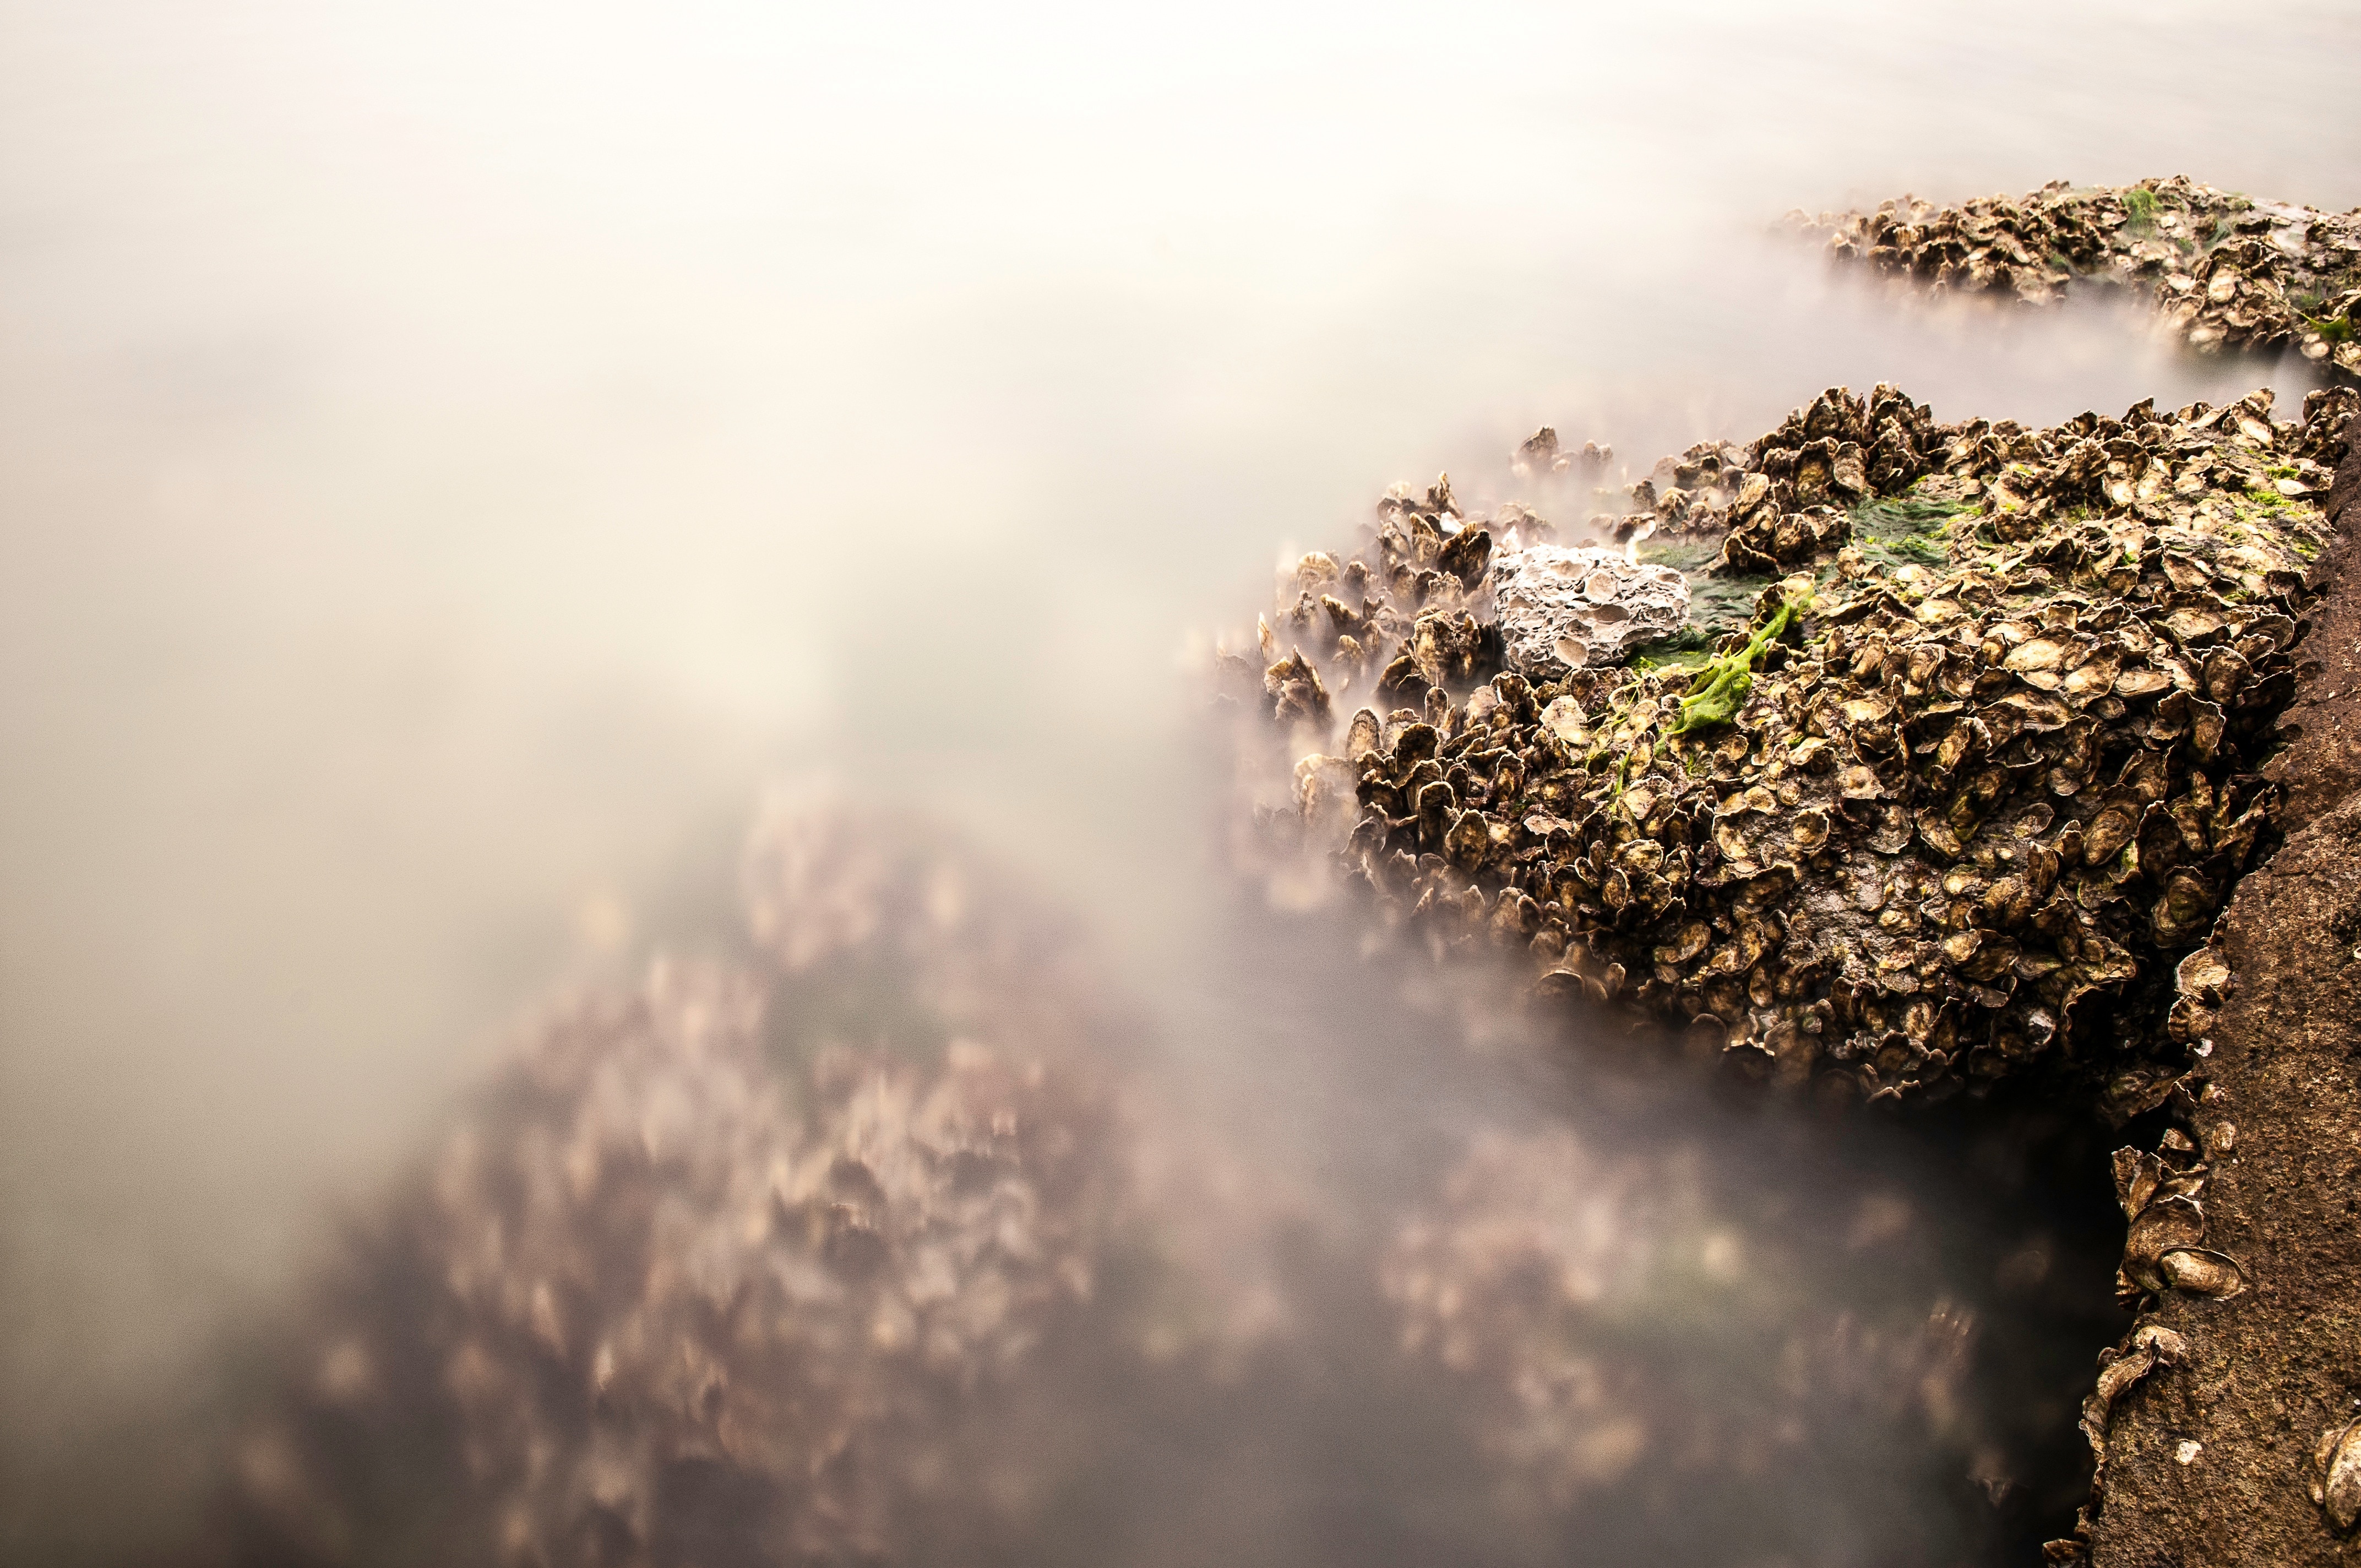 Mussels, Long Exposure, Rock, Stone, no people, nature